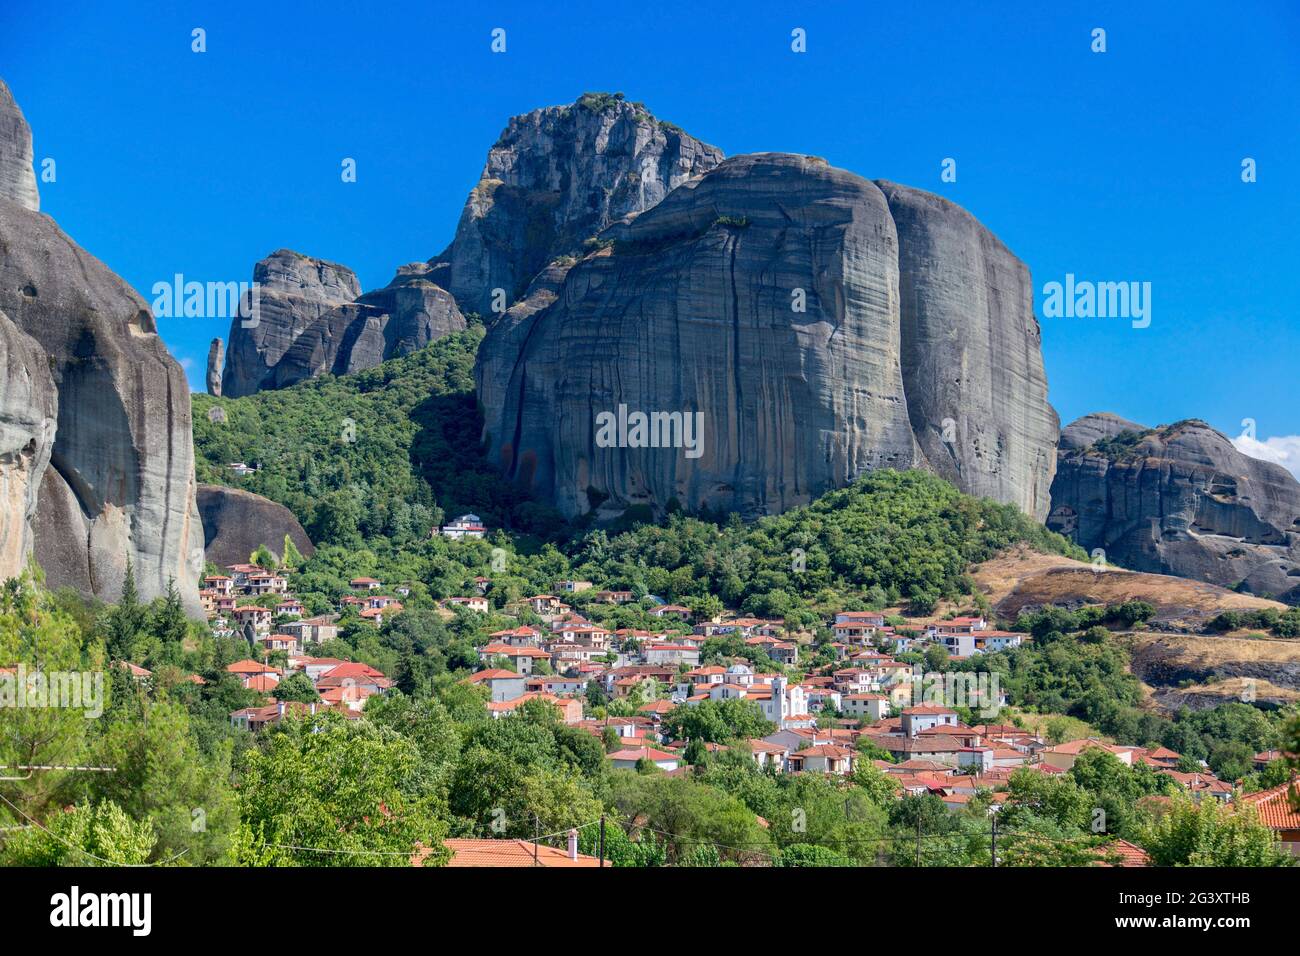 Christian monastery building on top of a hill in Meteora, Greece. Meteora is a UNESCO World Heritage Site due to its monastic bu Stock Photo